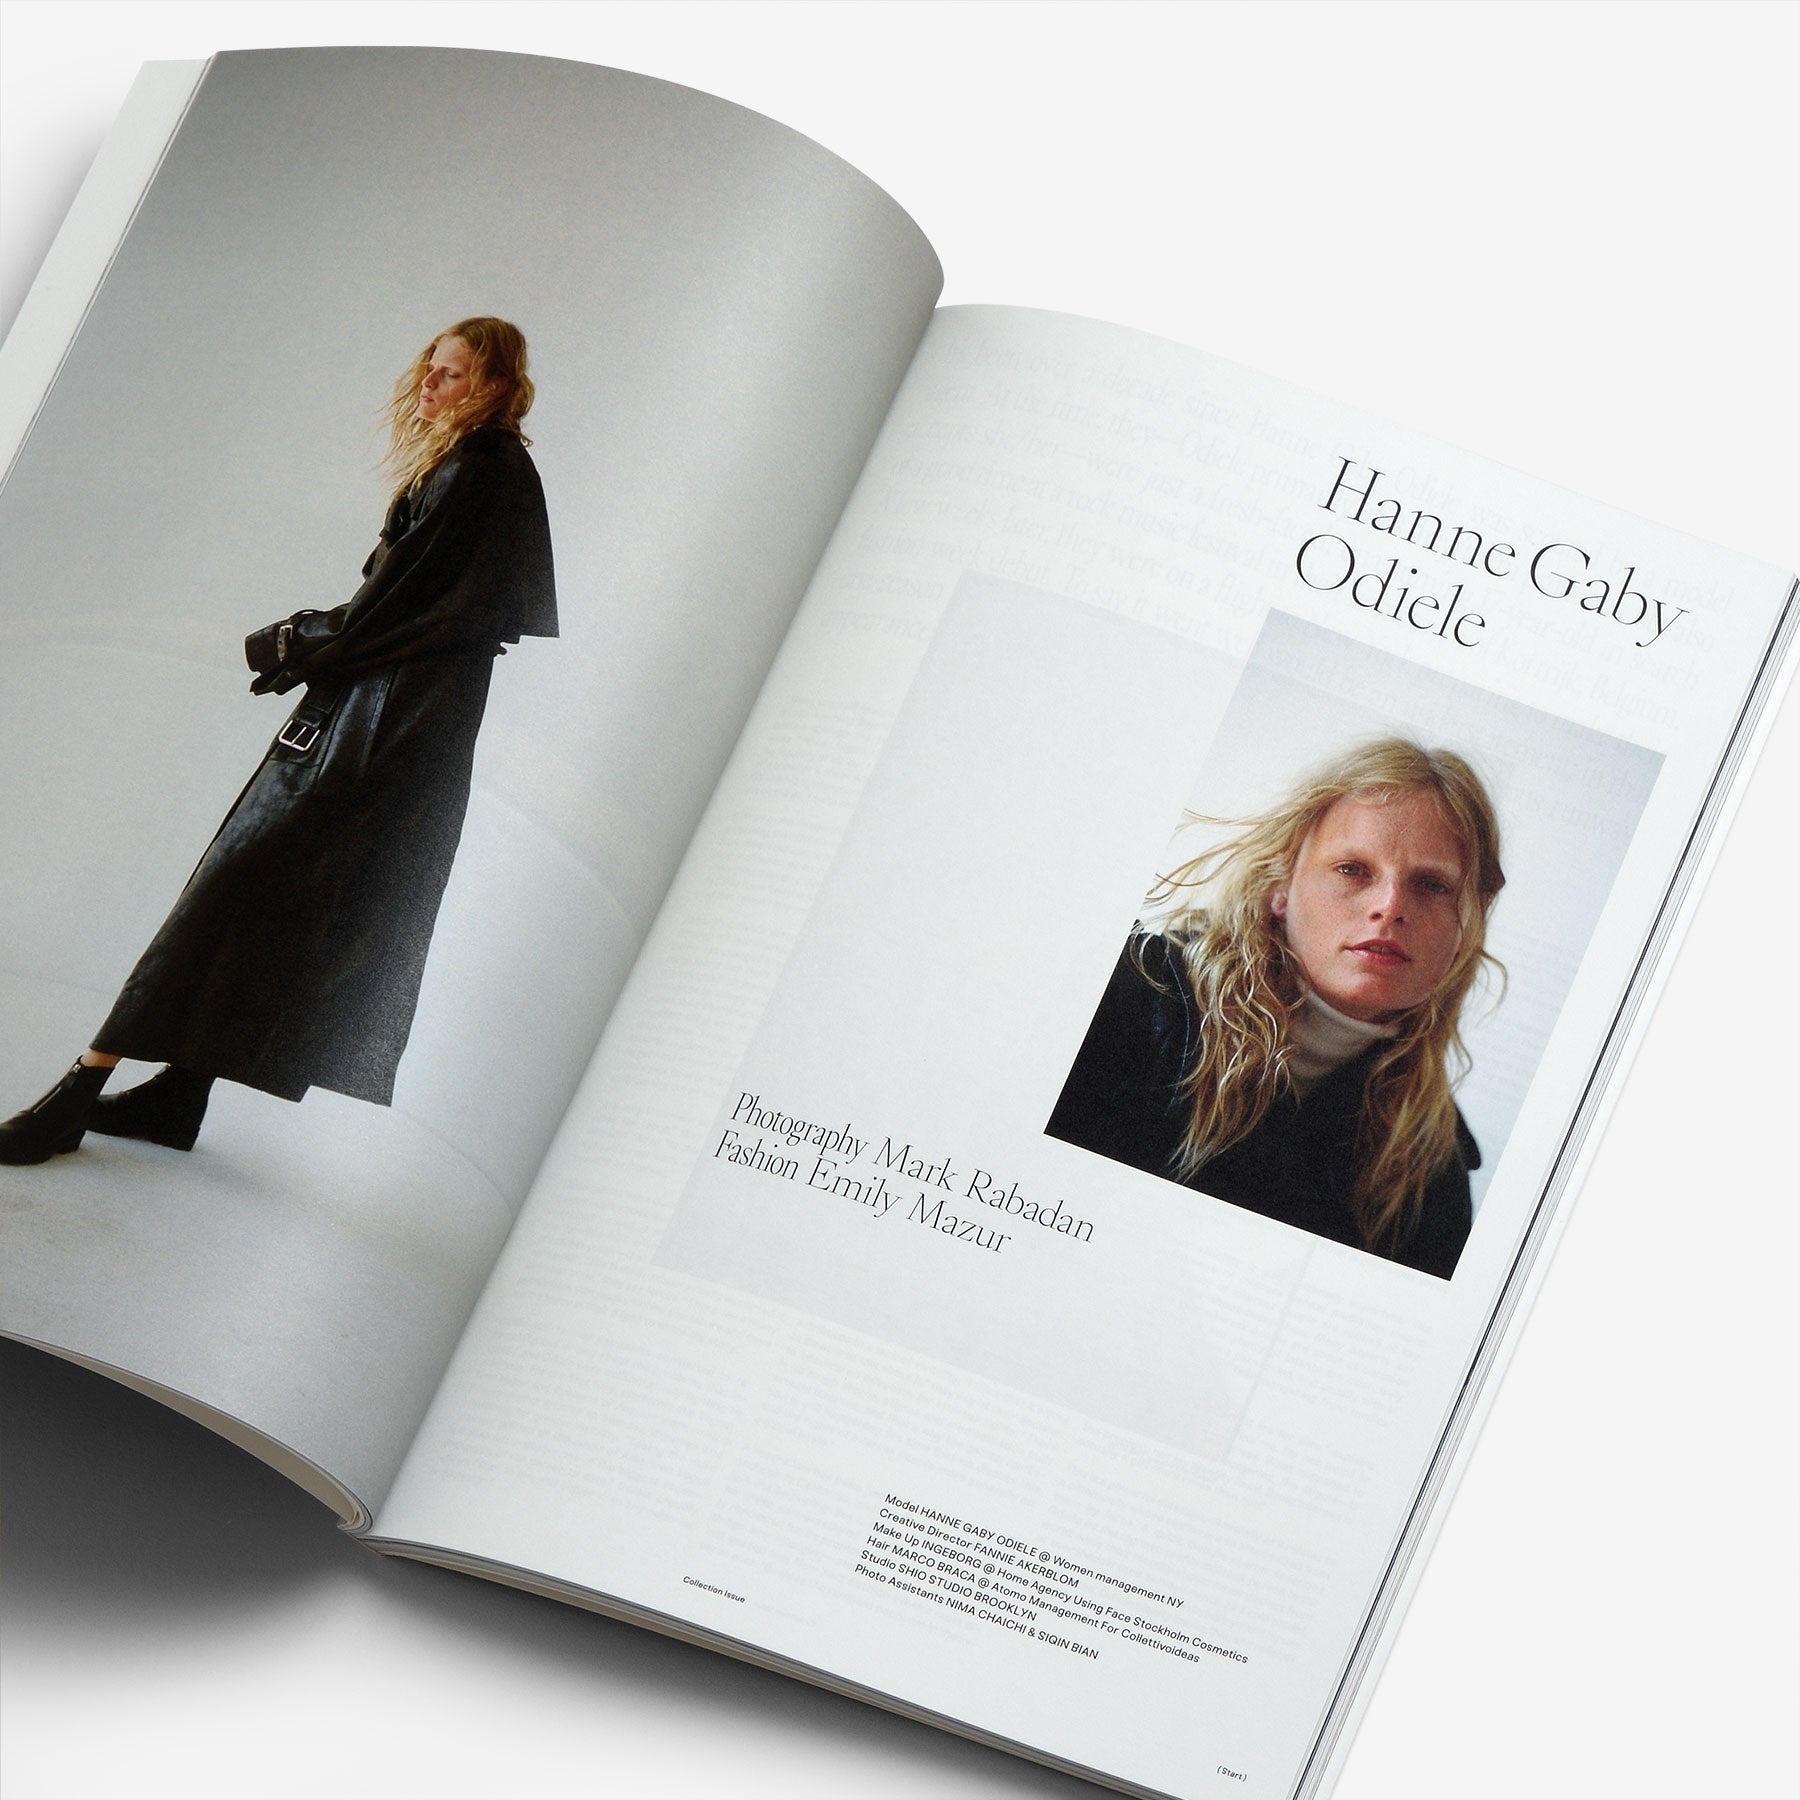 Collection Issue 01 (Hanne Gaby)